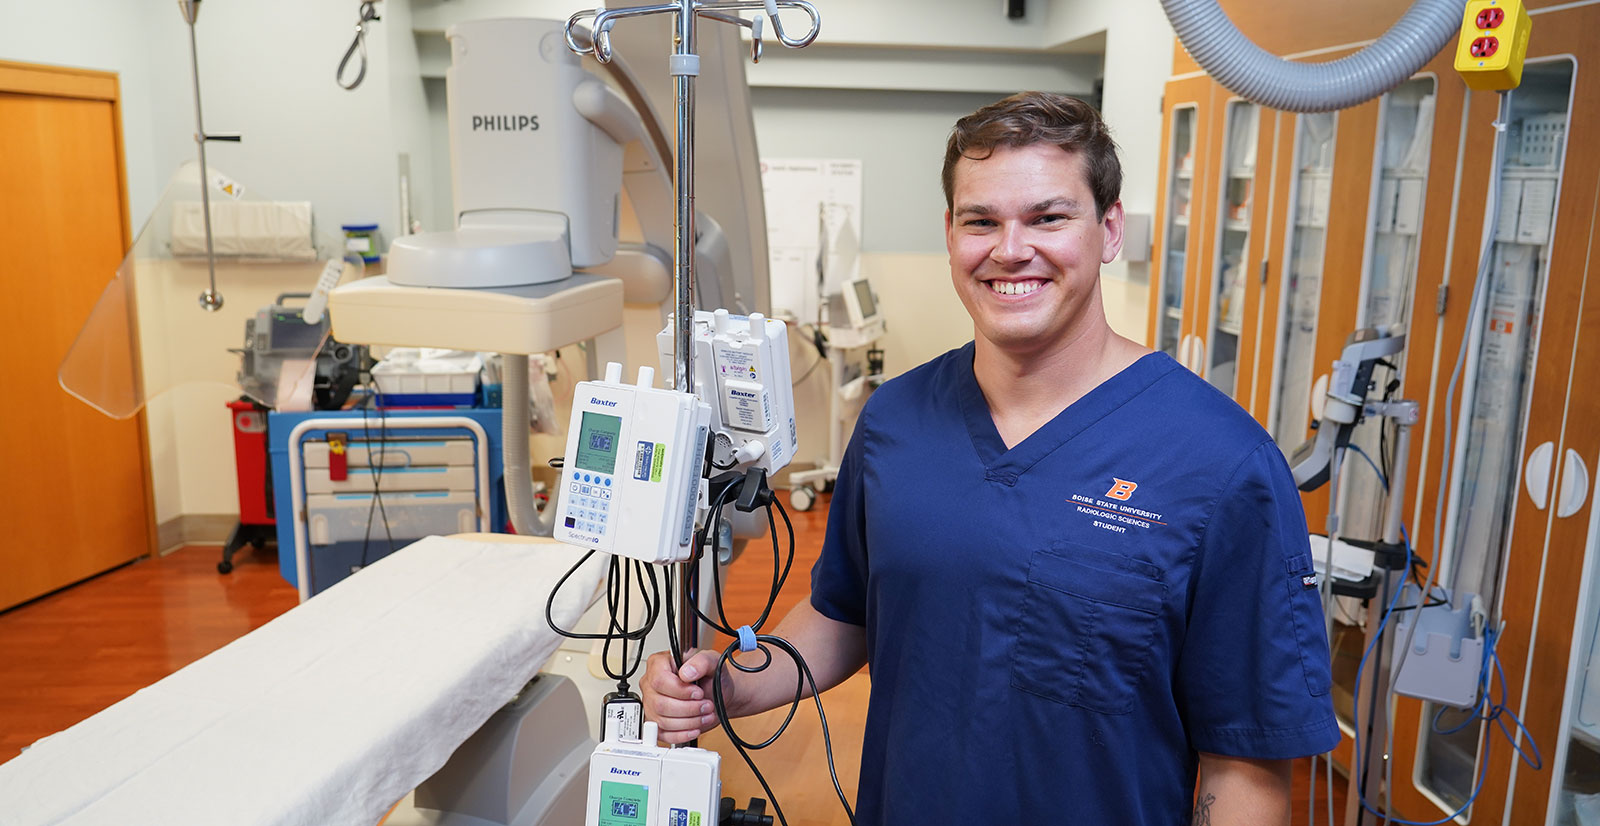 Daniel Connaughton is a student pursuing the new online Bachelor of Science in Advanced Medical Imaging and a Certificate in Interventional Radiology and Interventional Cardiology.